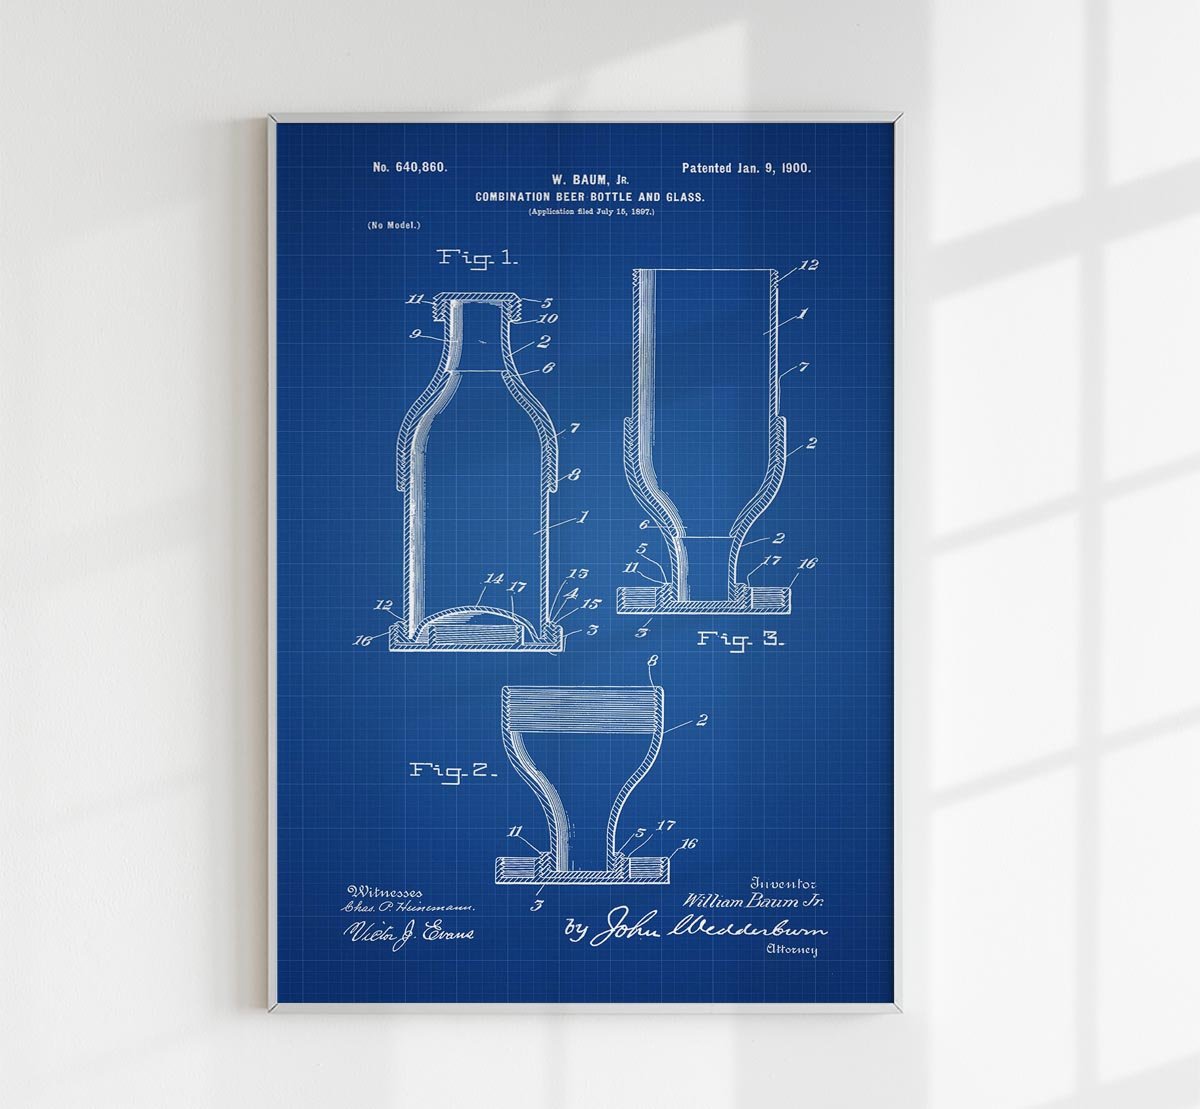 Beer Bottle & Glass Patent Poster